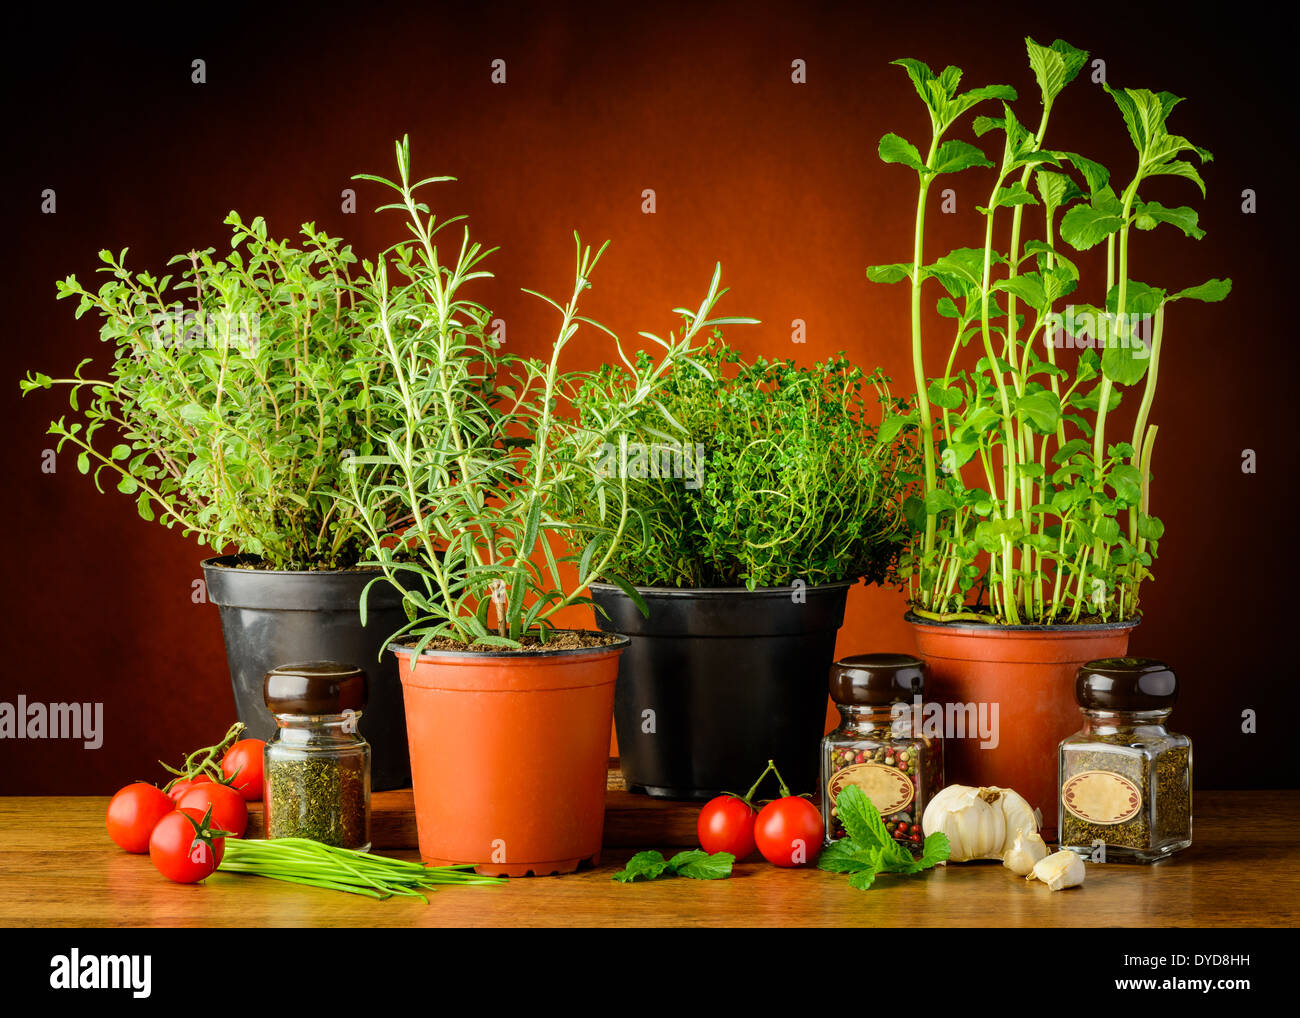 still life with fresh green herbs in pots Stock Photo